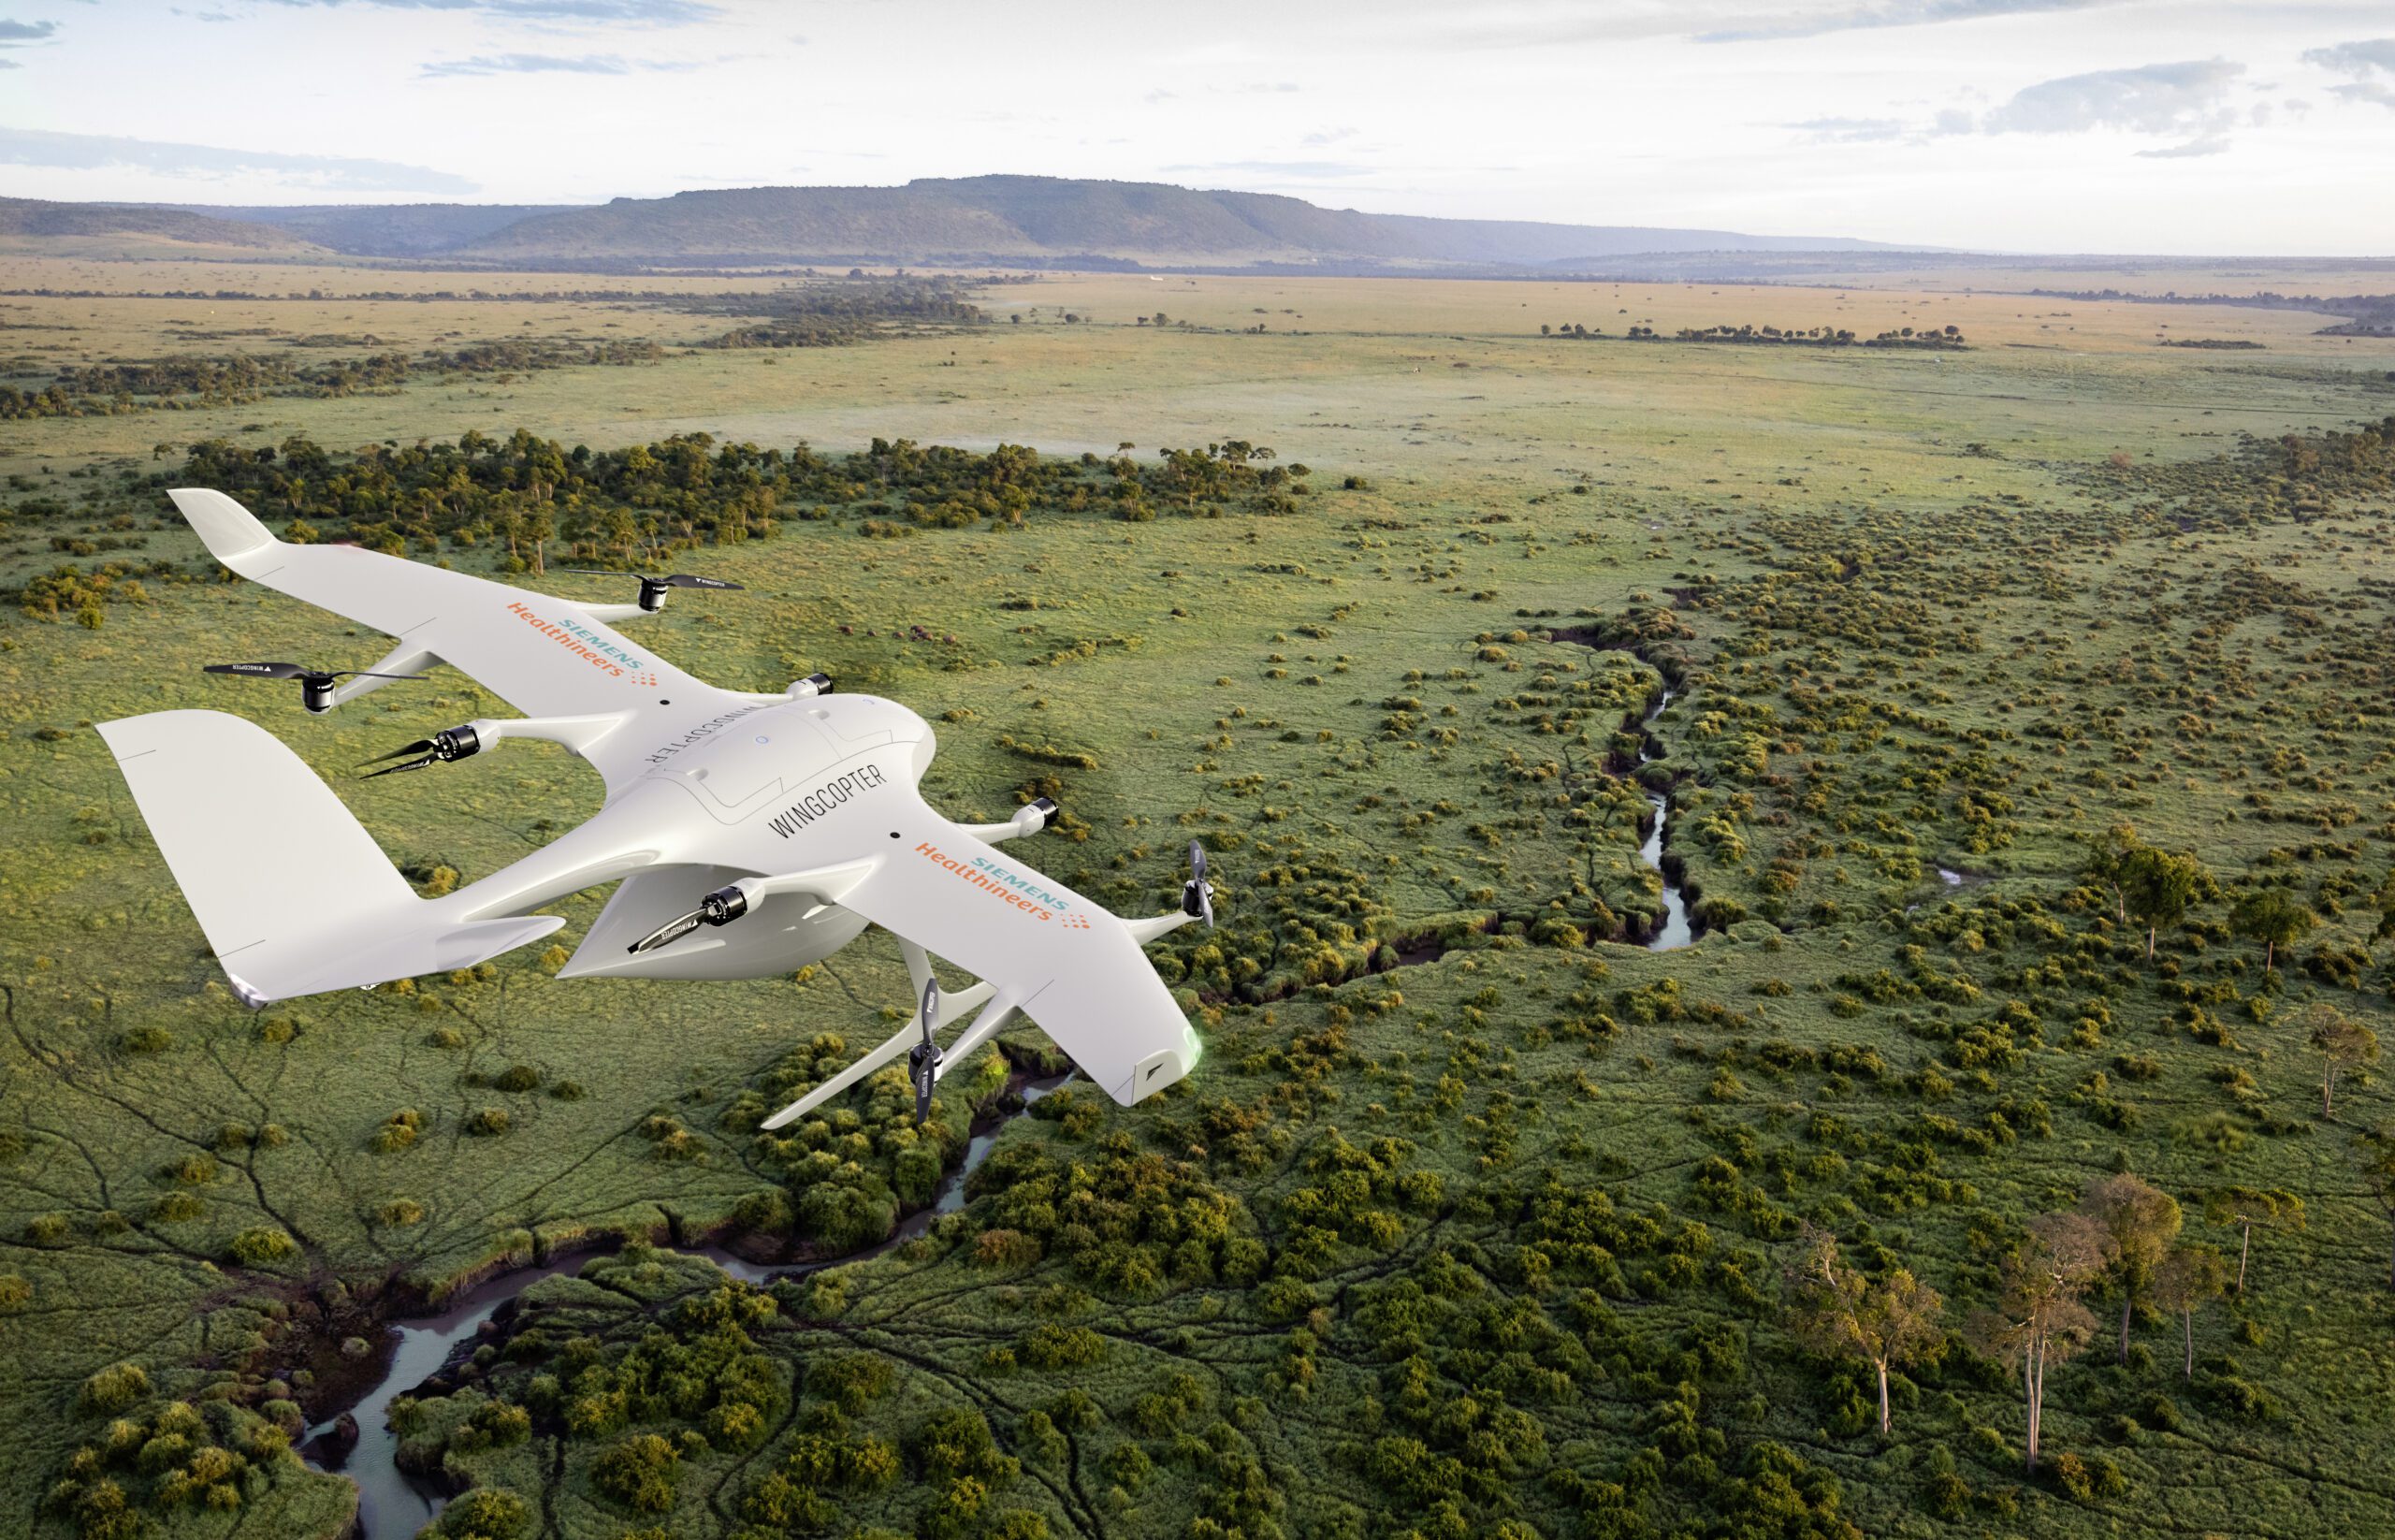 Siemens Launches Drone Pilot to Transport Lab Samples & Medical Supplies in Africa